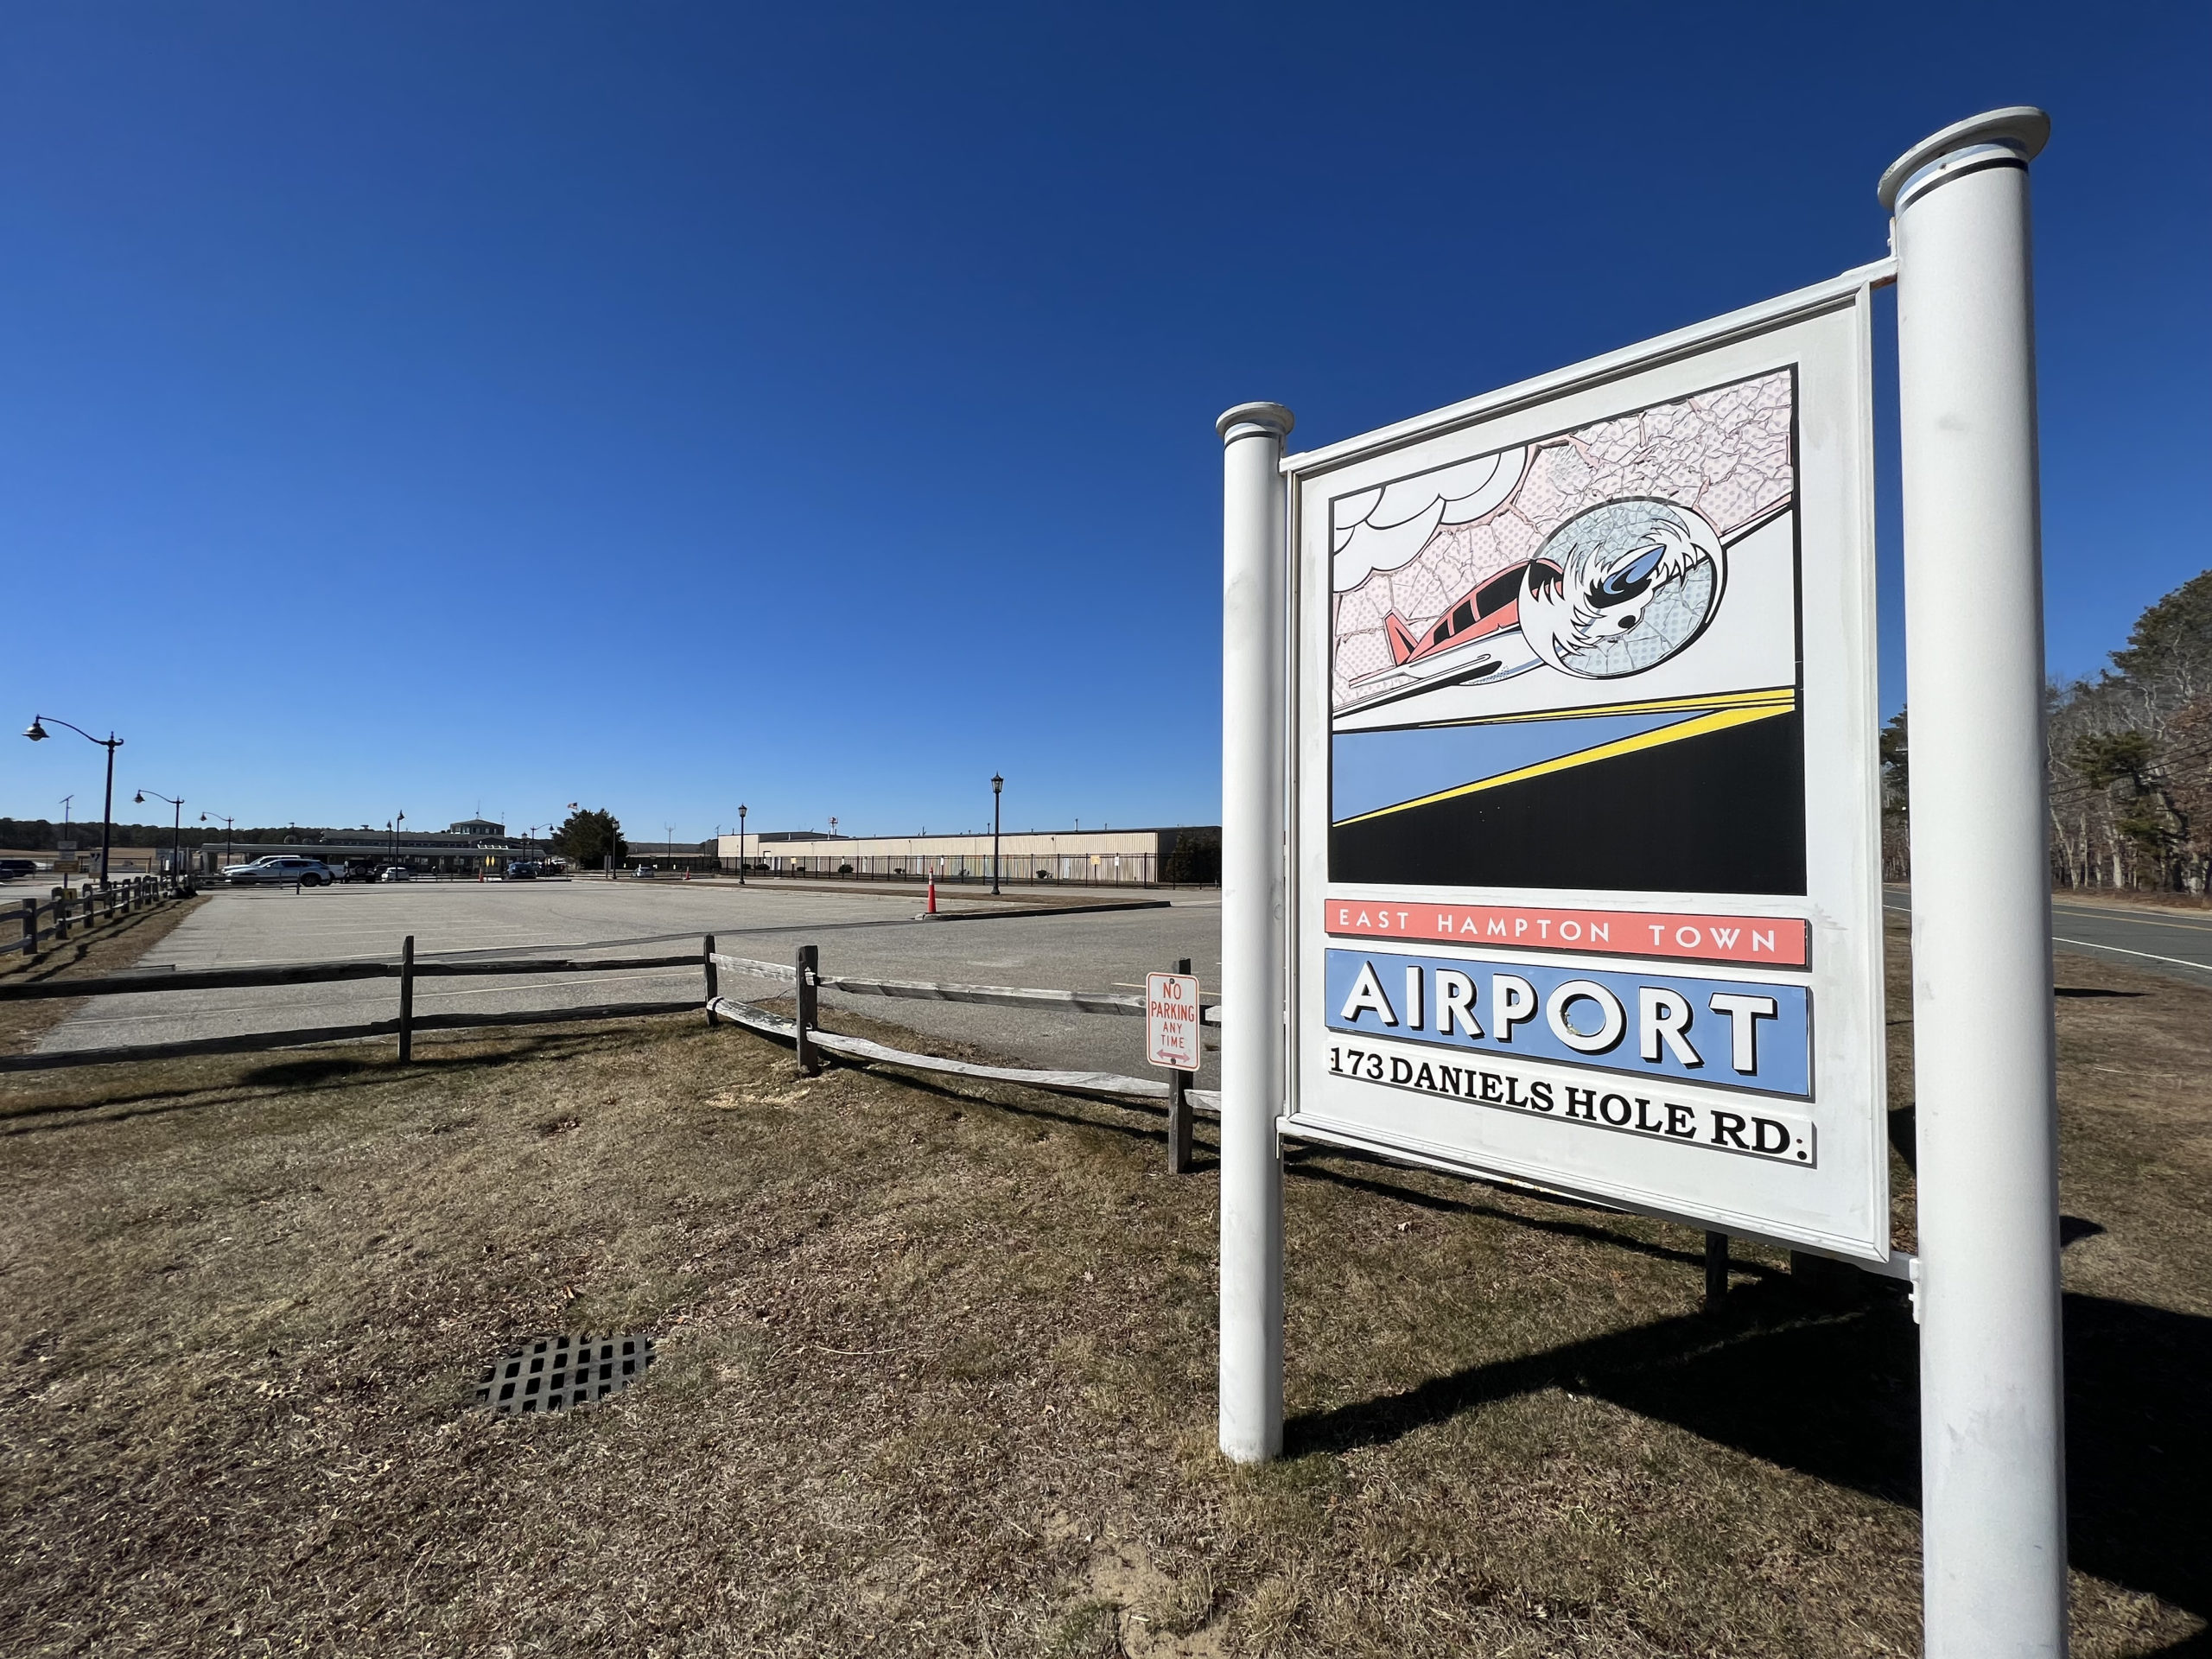 New rules set to be proposed by East Hampton Town on Tuesday would limit commercial helicopters and seaplanes to one flight per day and ban the largest private jets from the airport entirely. DANA SHAW